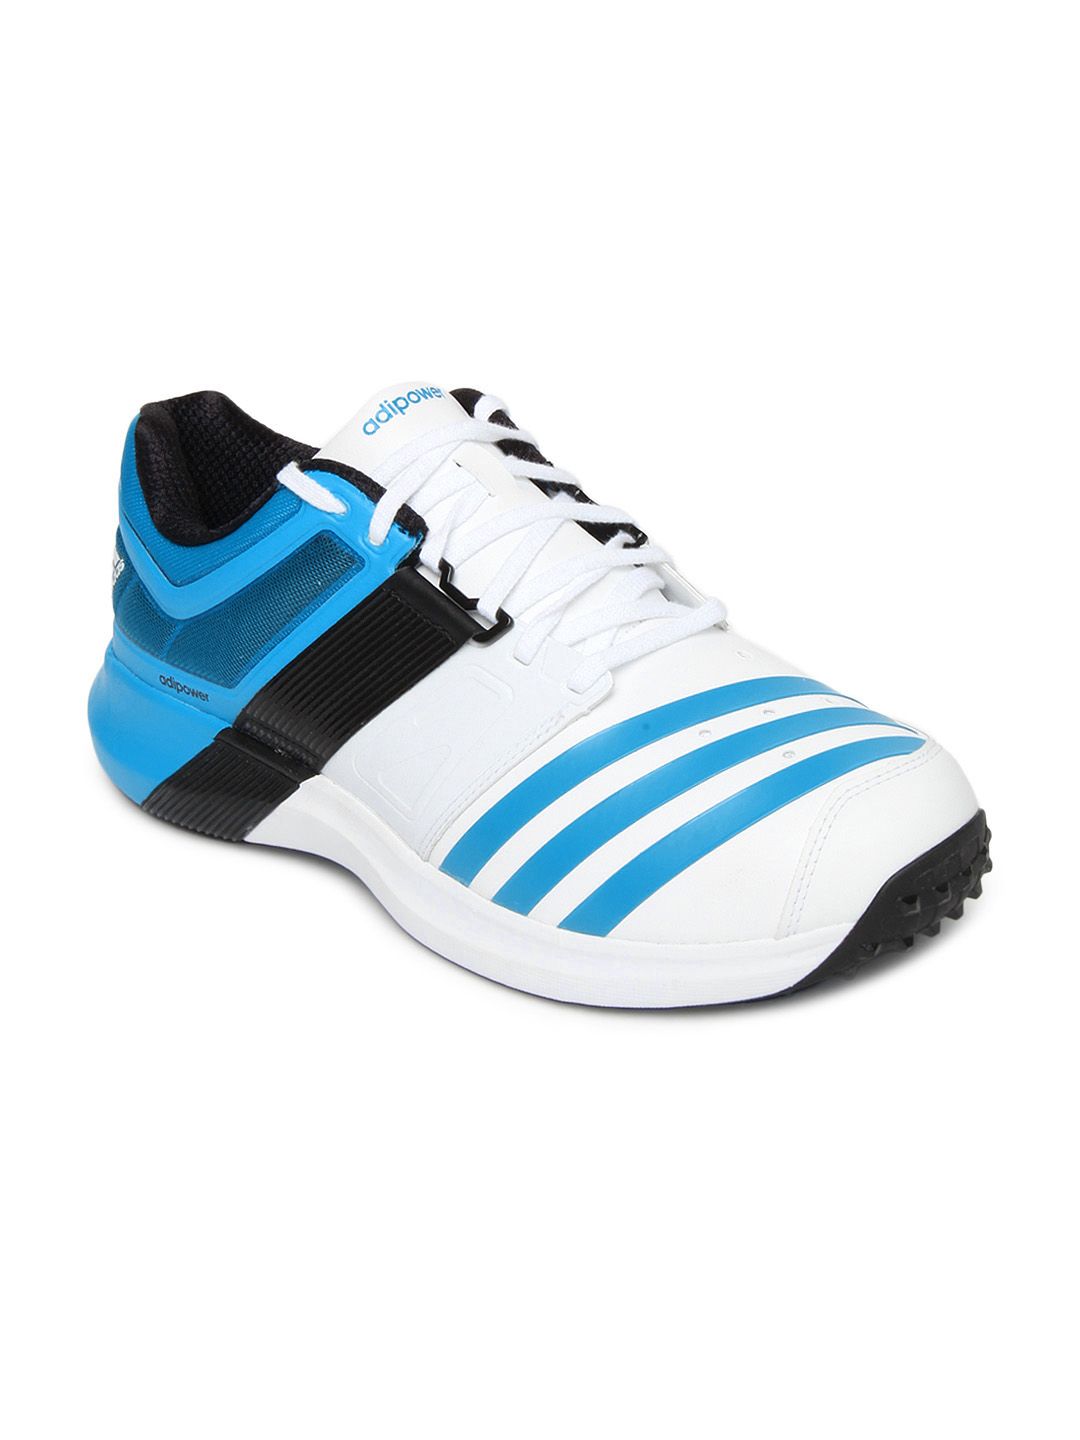 adidas sports shoes with price,adidas 